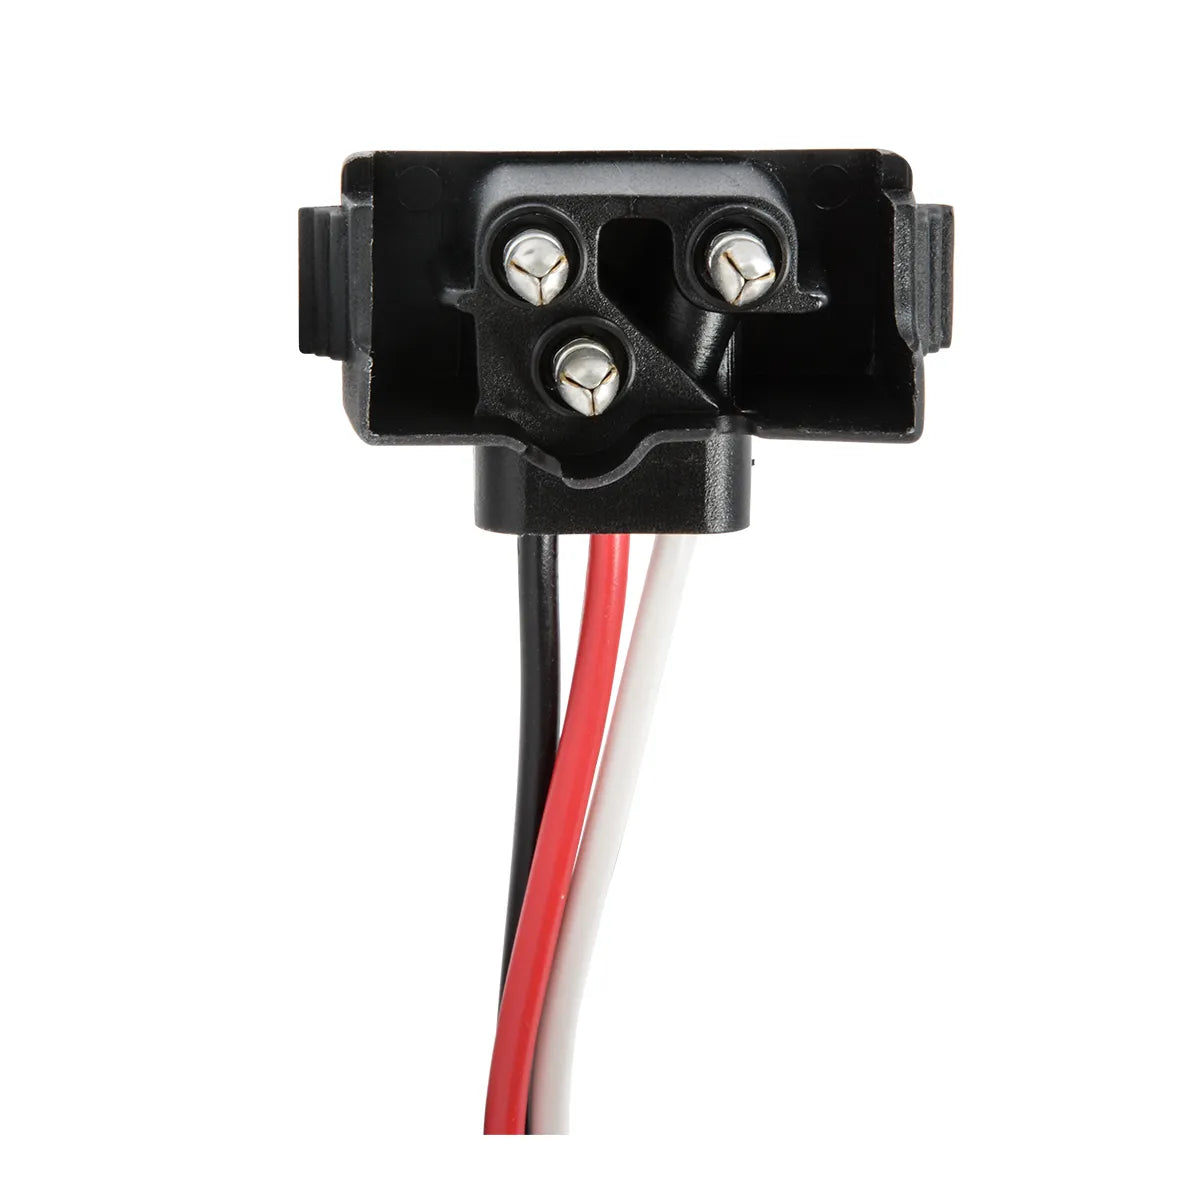 WEATHER PACK 3-PIN LIGHT ADAPTER PLUG